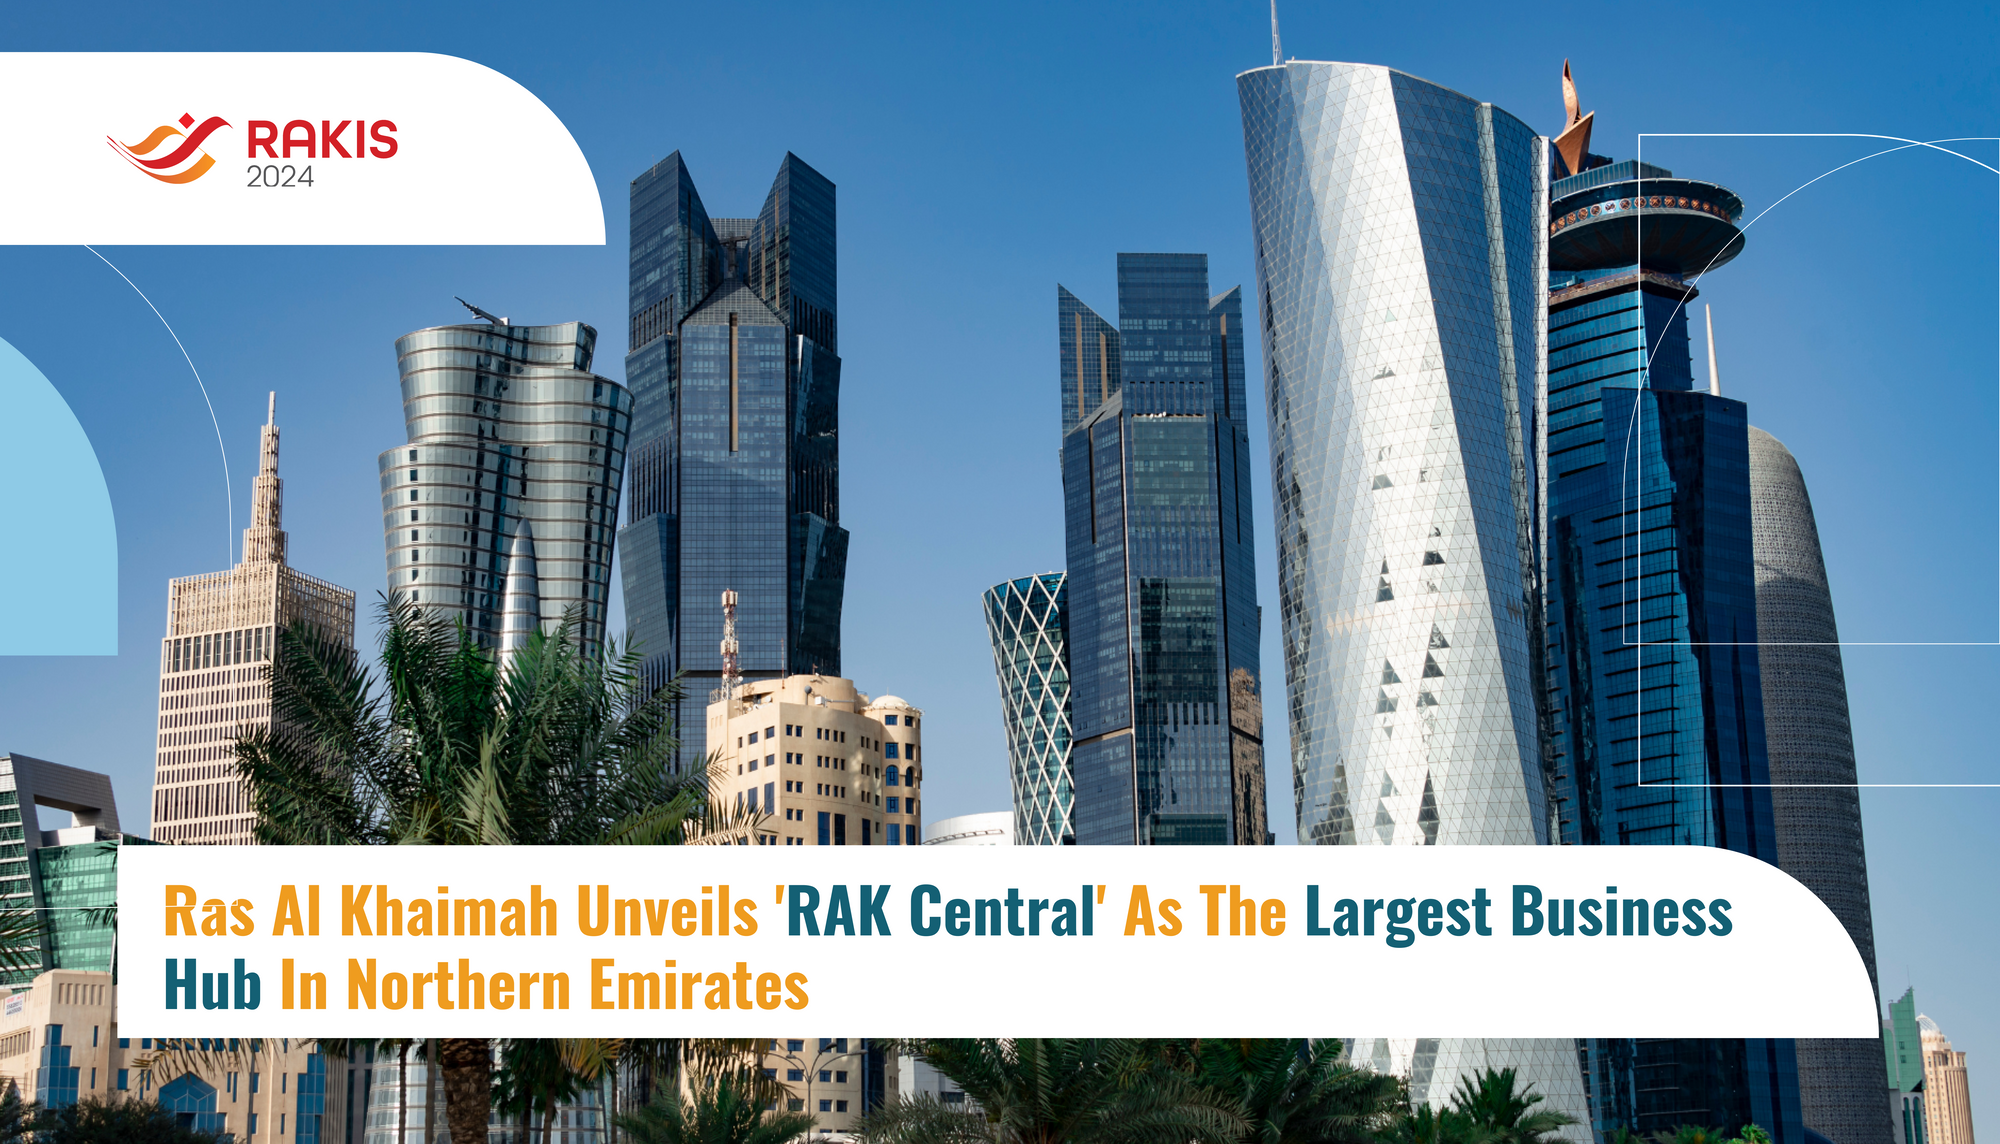 Ras Al Khaimah Unveils 'RAK Central' As The Largest Business Hub In Northern Emirates